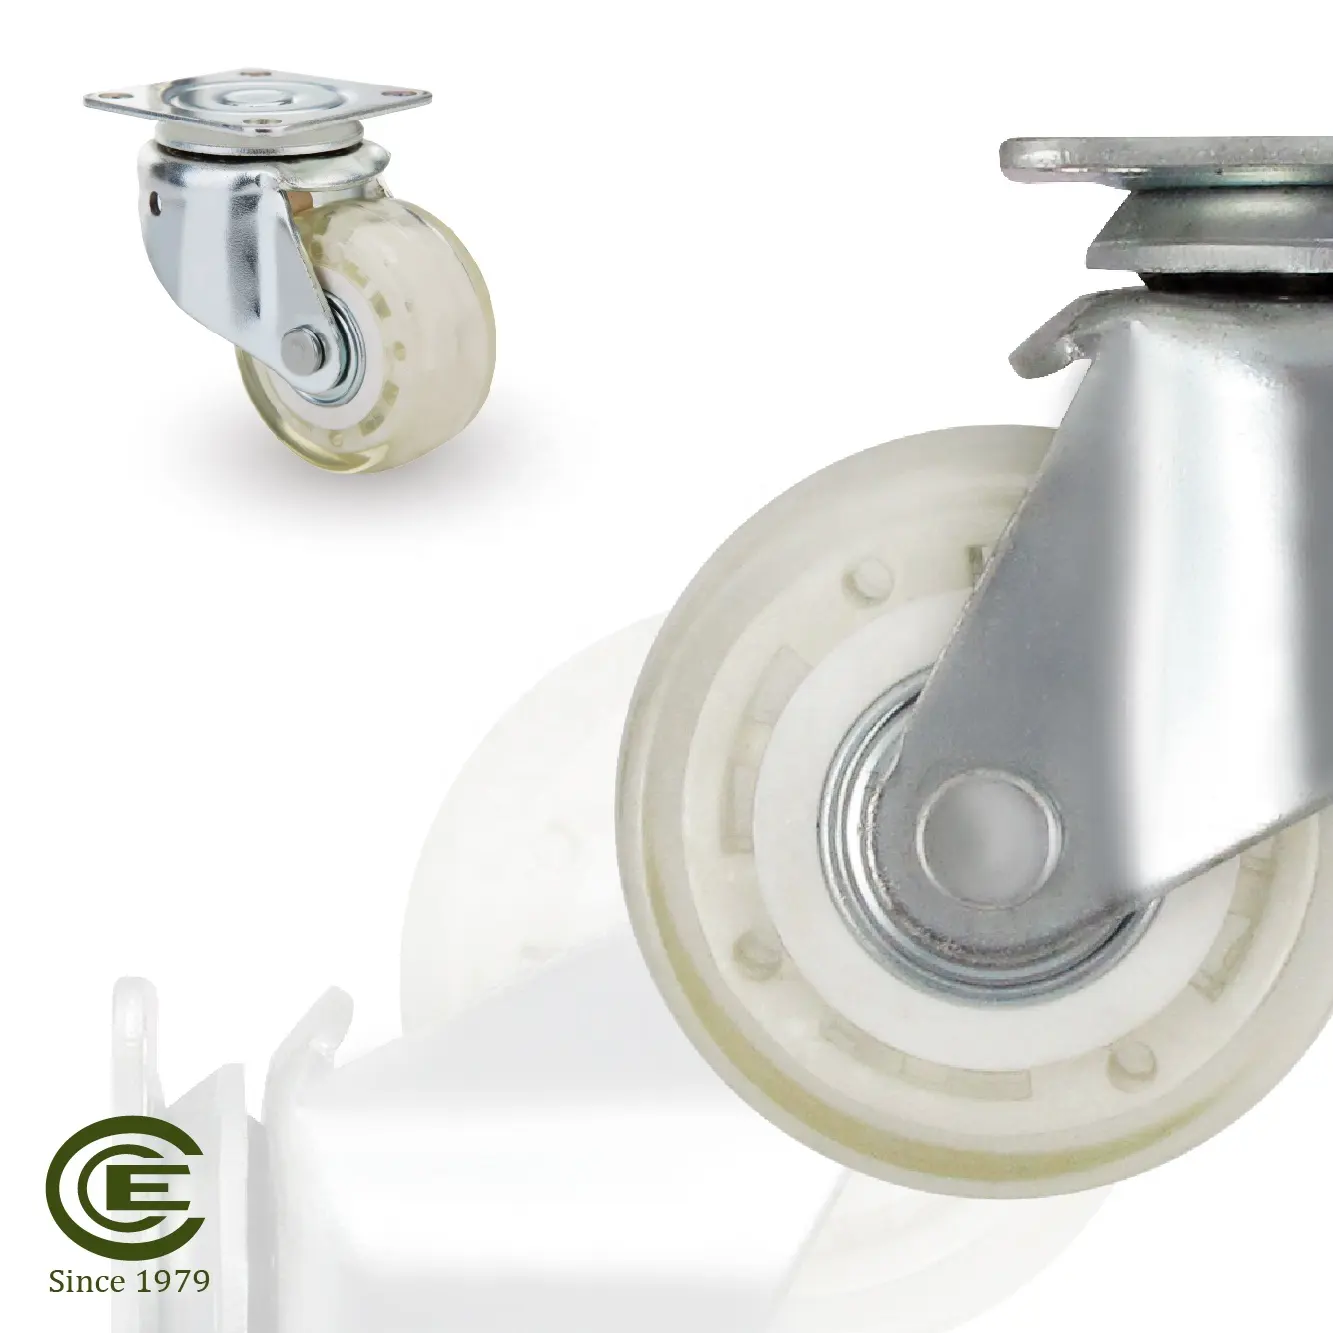 CCE Caster 50mm PVC Swivel Toy Car 2 Inch Caster Wheels